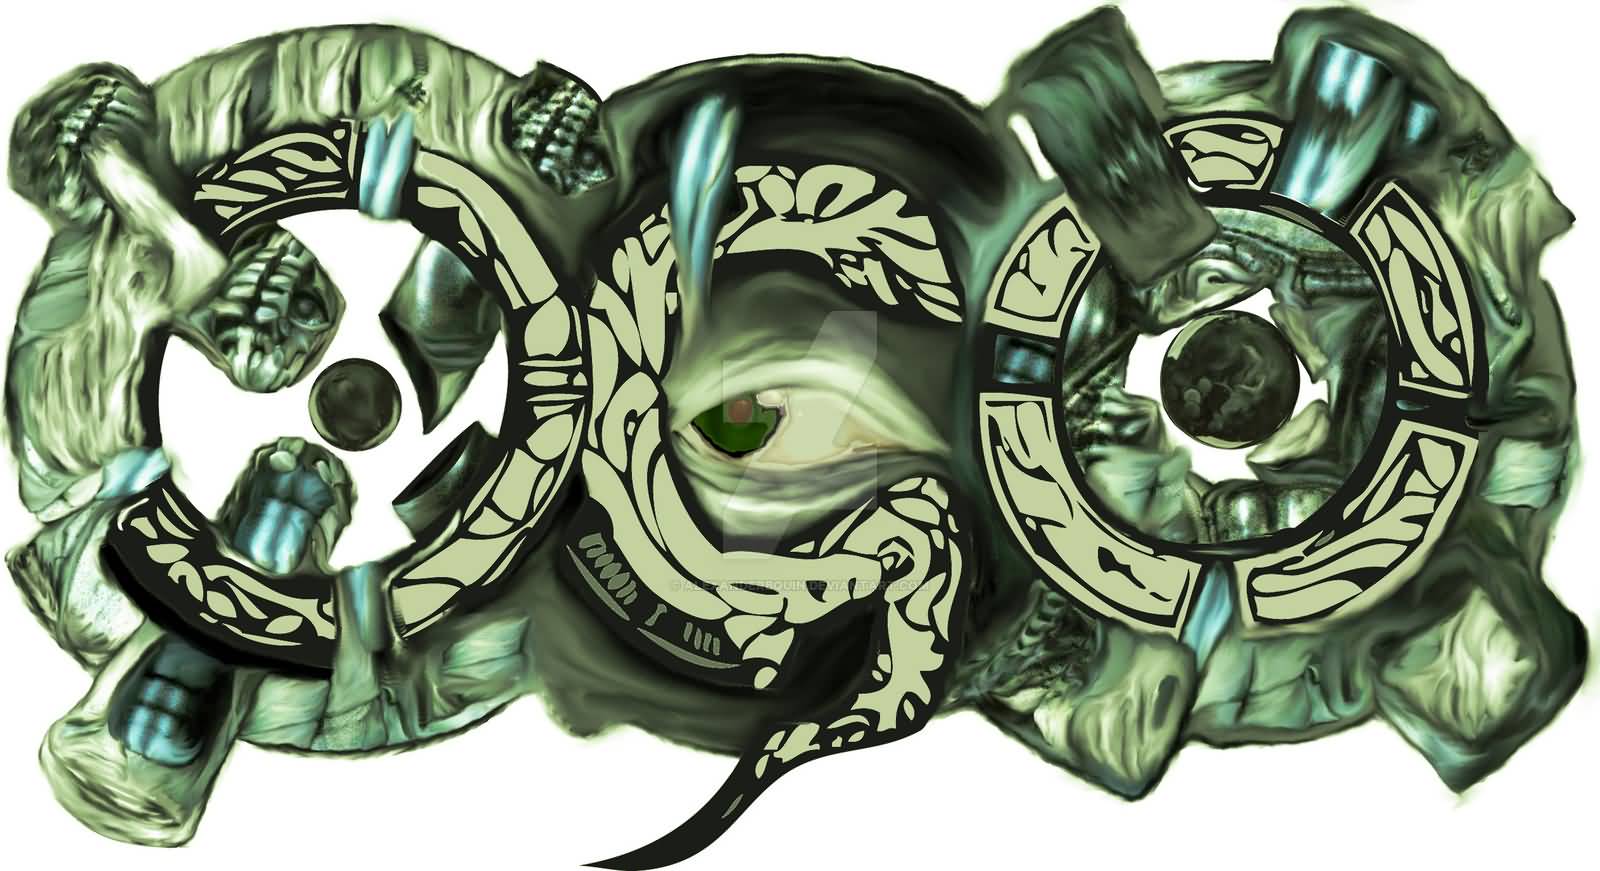 Unique Green Biomechanical With Eye Tattoo Design By AlexanderBQuin